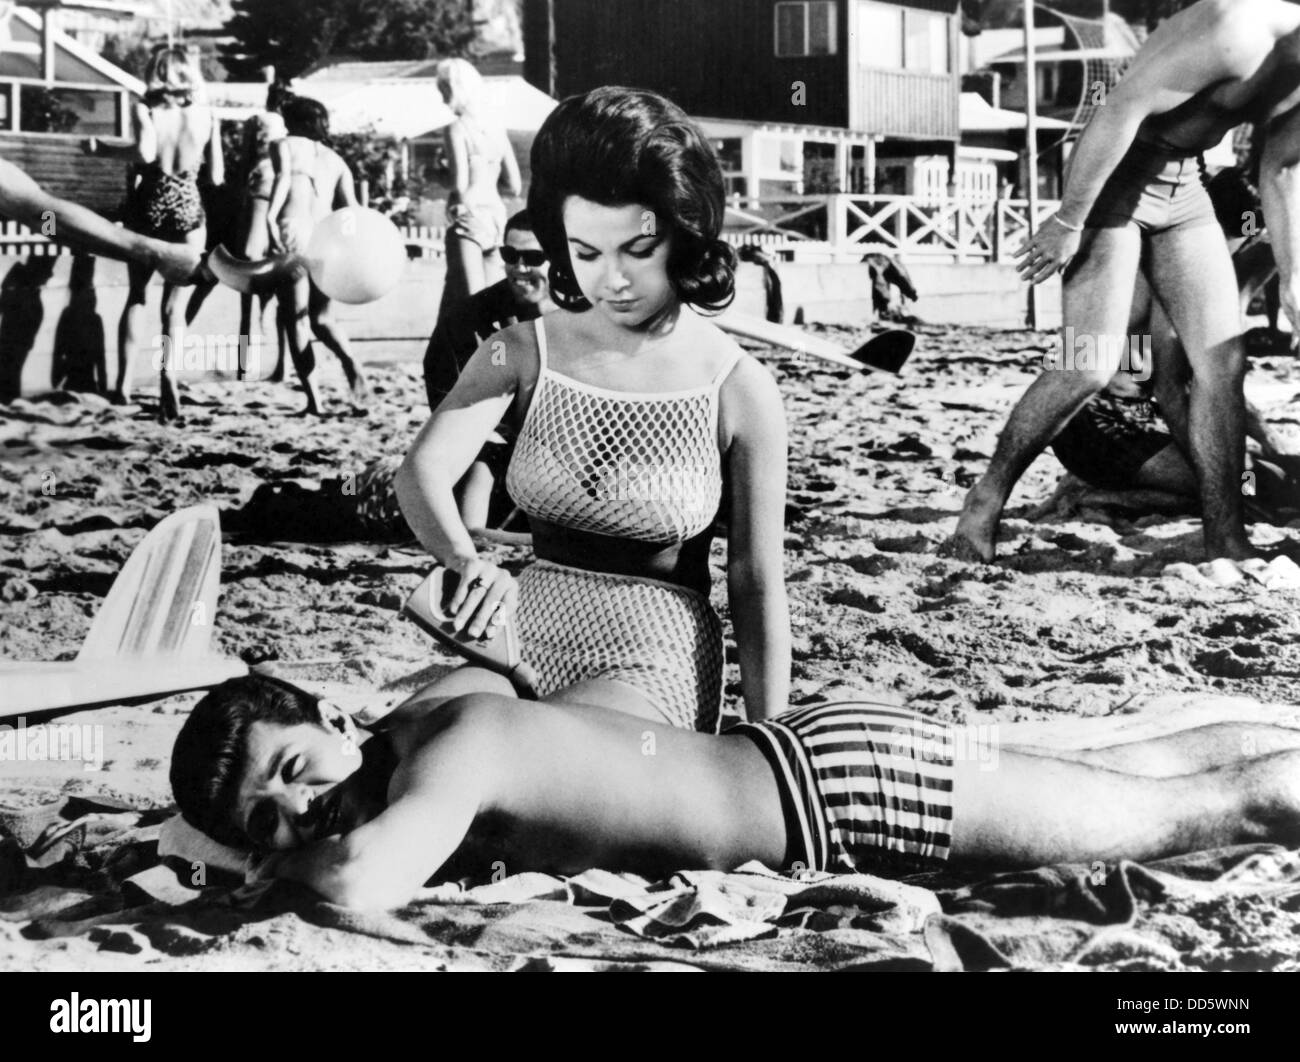 MUSCLE BEACH PARTY (1964) FRANKIE AVALON, ANNETTE FUNICELLO, WILLIAM ASHER  (DIR), MUSC 001 MOVIESTORE COLLECTION LTD Stock Photo - Alamy